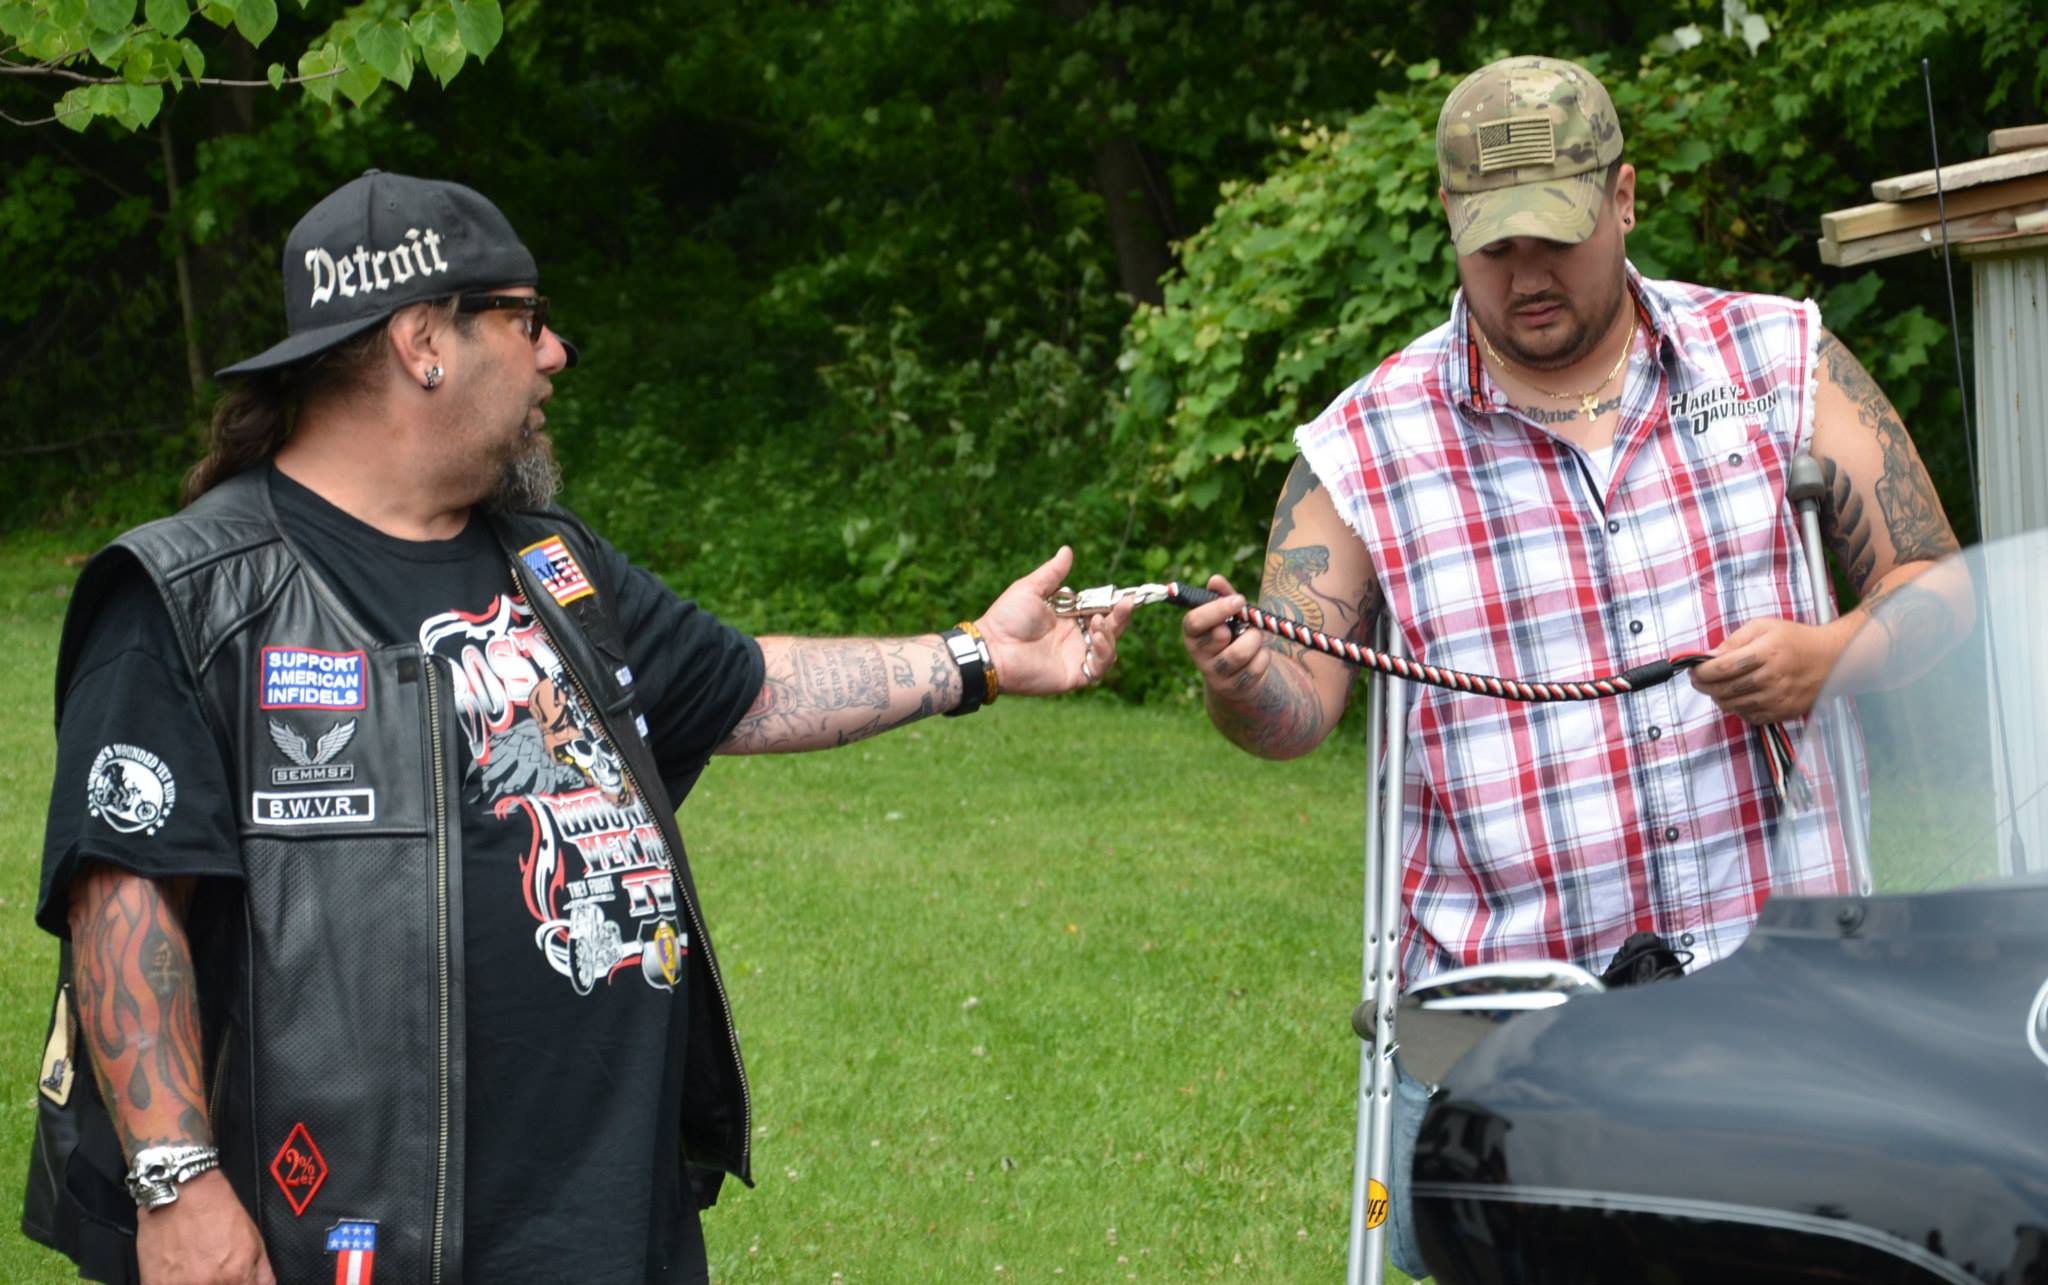 Boston Wounded Vet MC Ride presents Andy Kingsley his New 2014 Modified Trike16